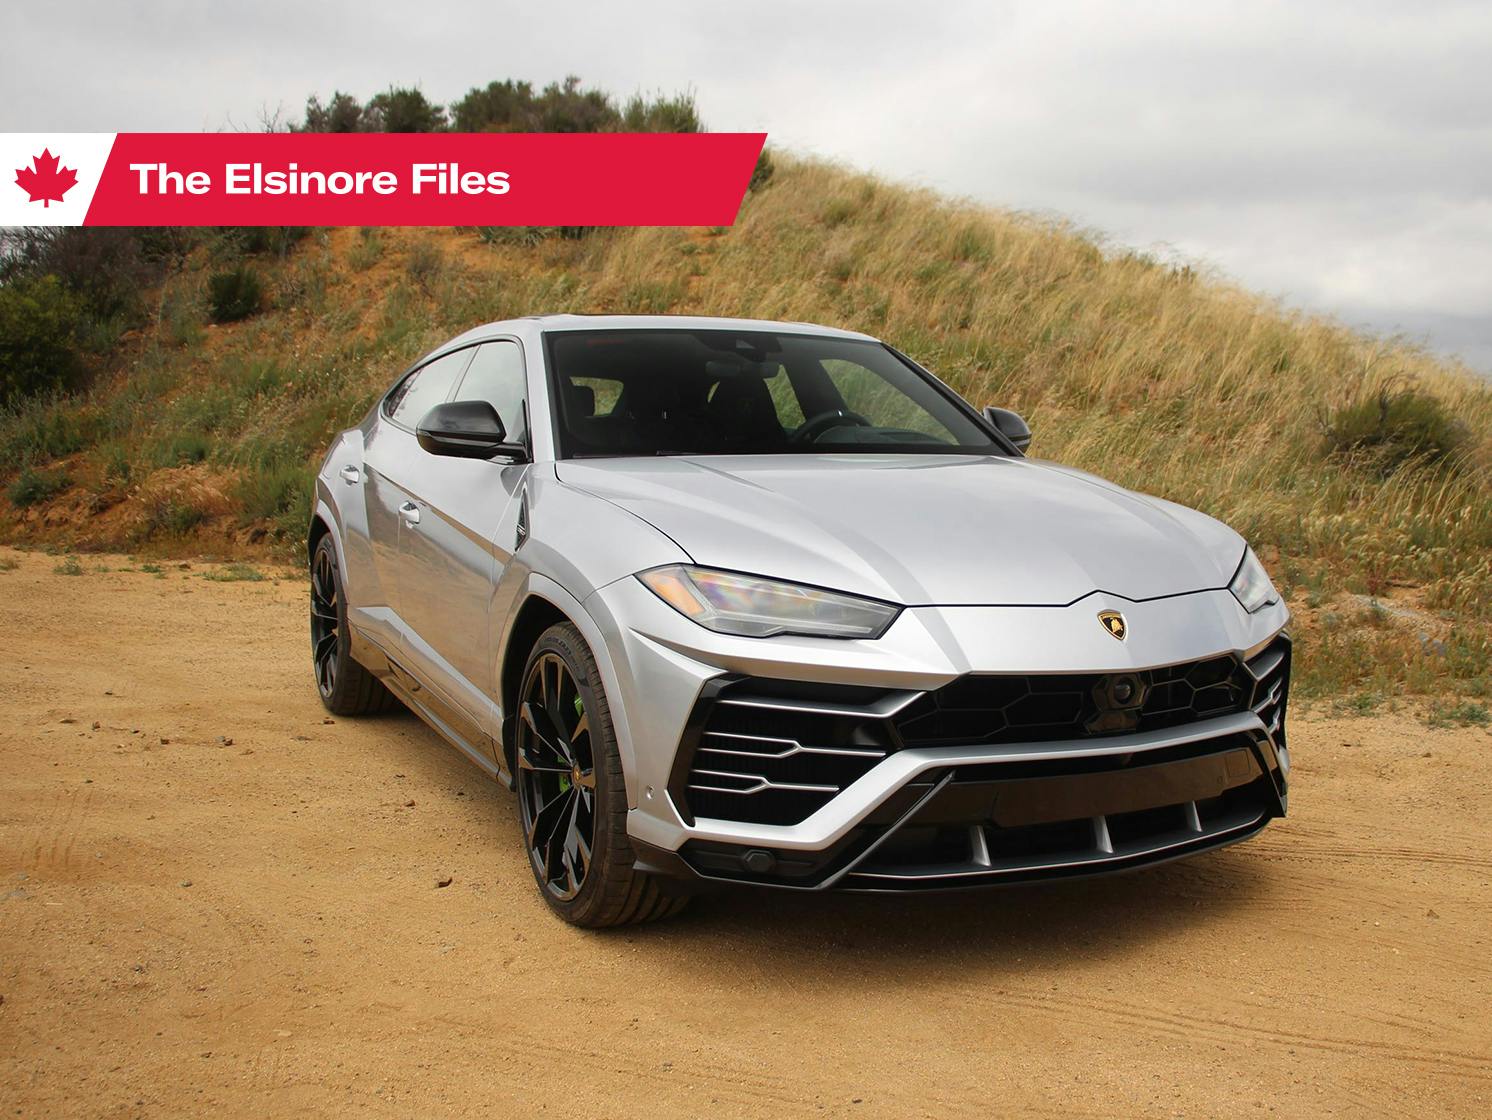 Lamborghini Urus Review: There's Absolutely Nothing Else Like It. For Now.